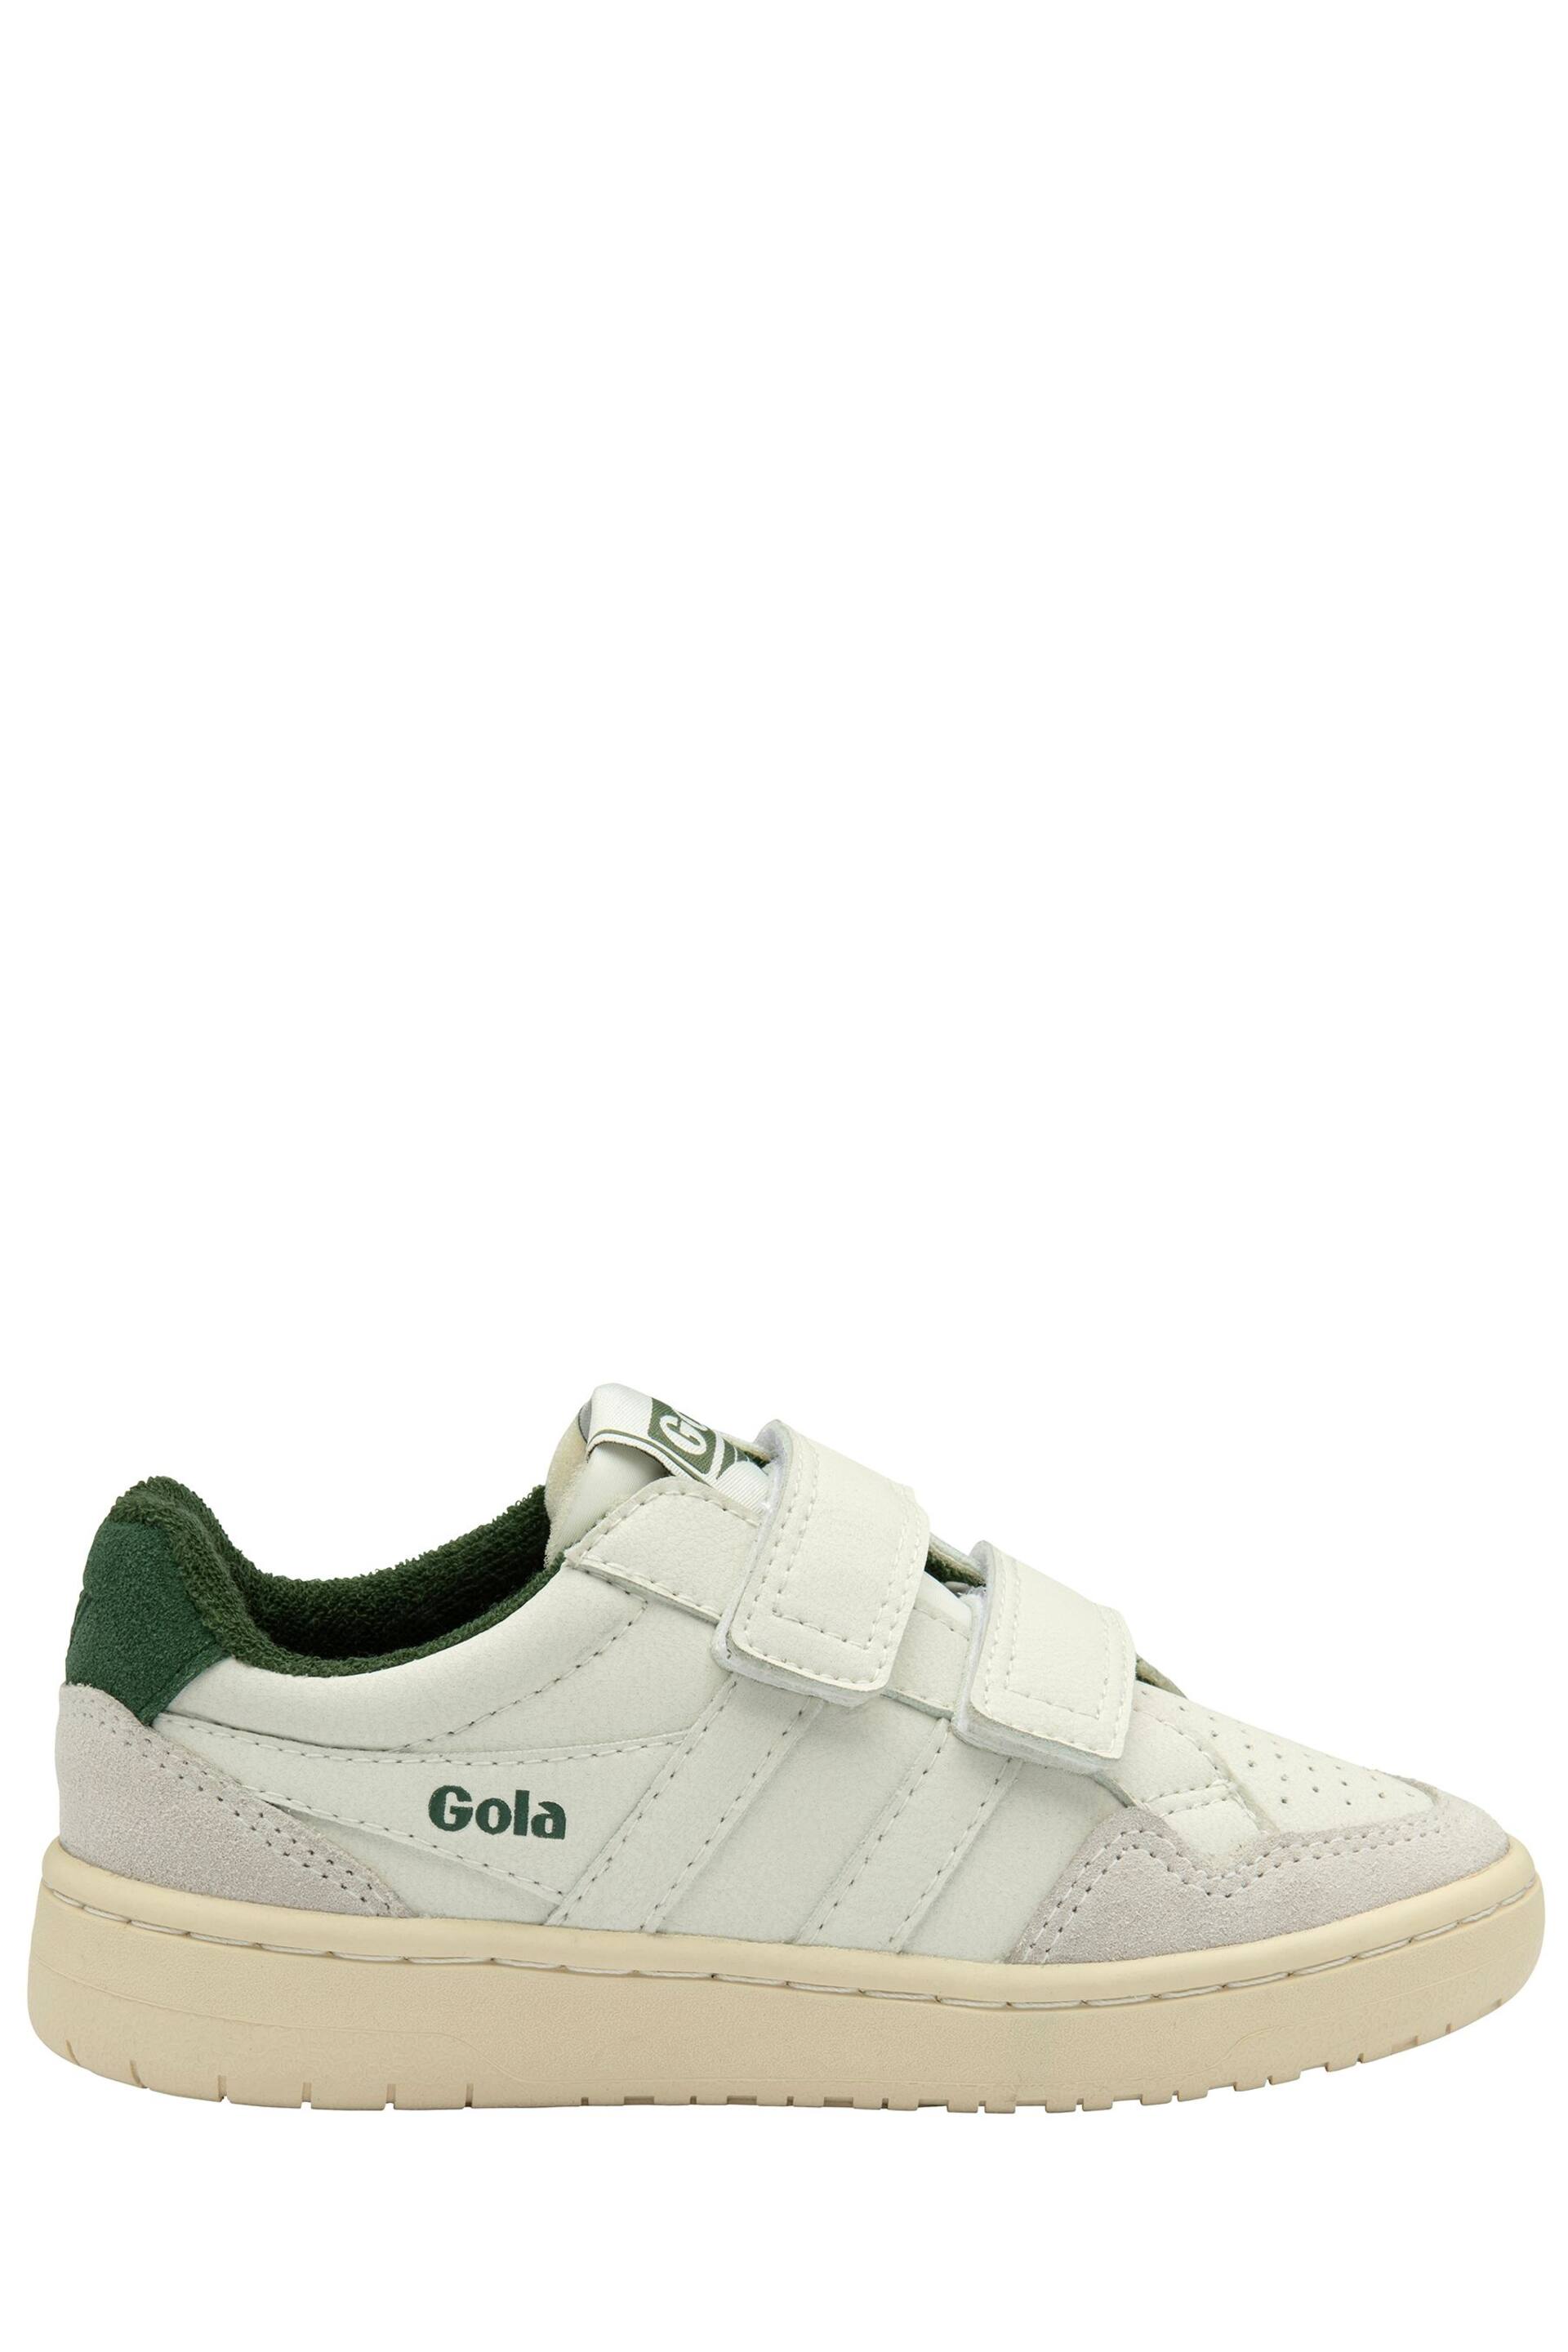 Gola Off White/Evergreen Kids Eagle Strap Trainers - Image 1 of 4